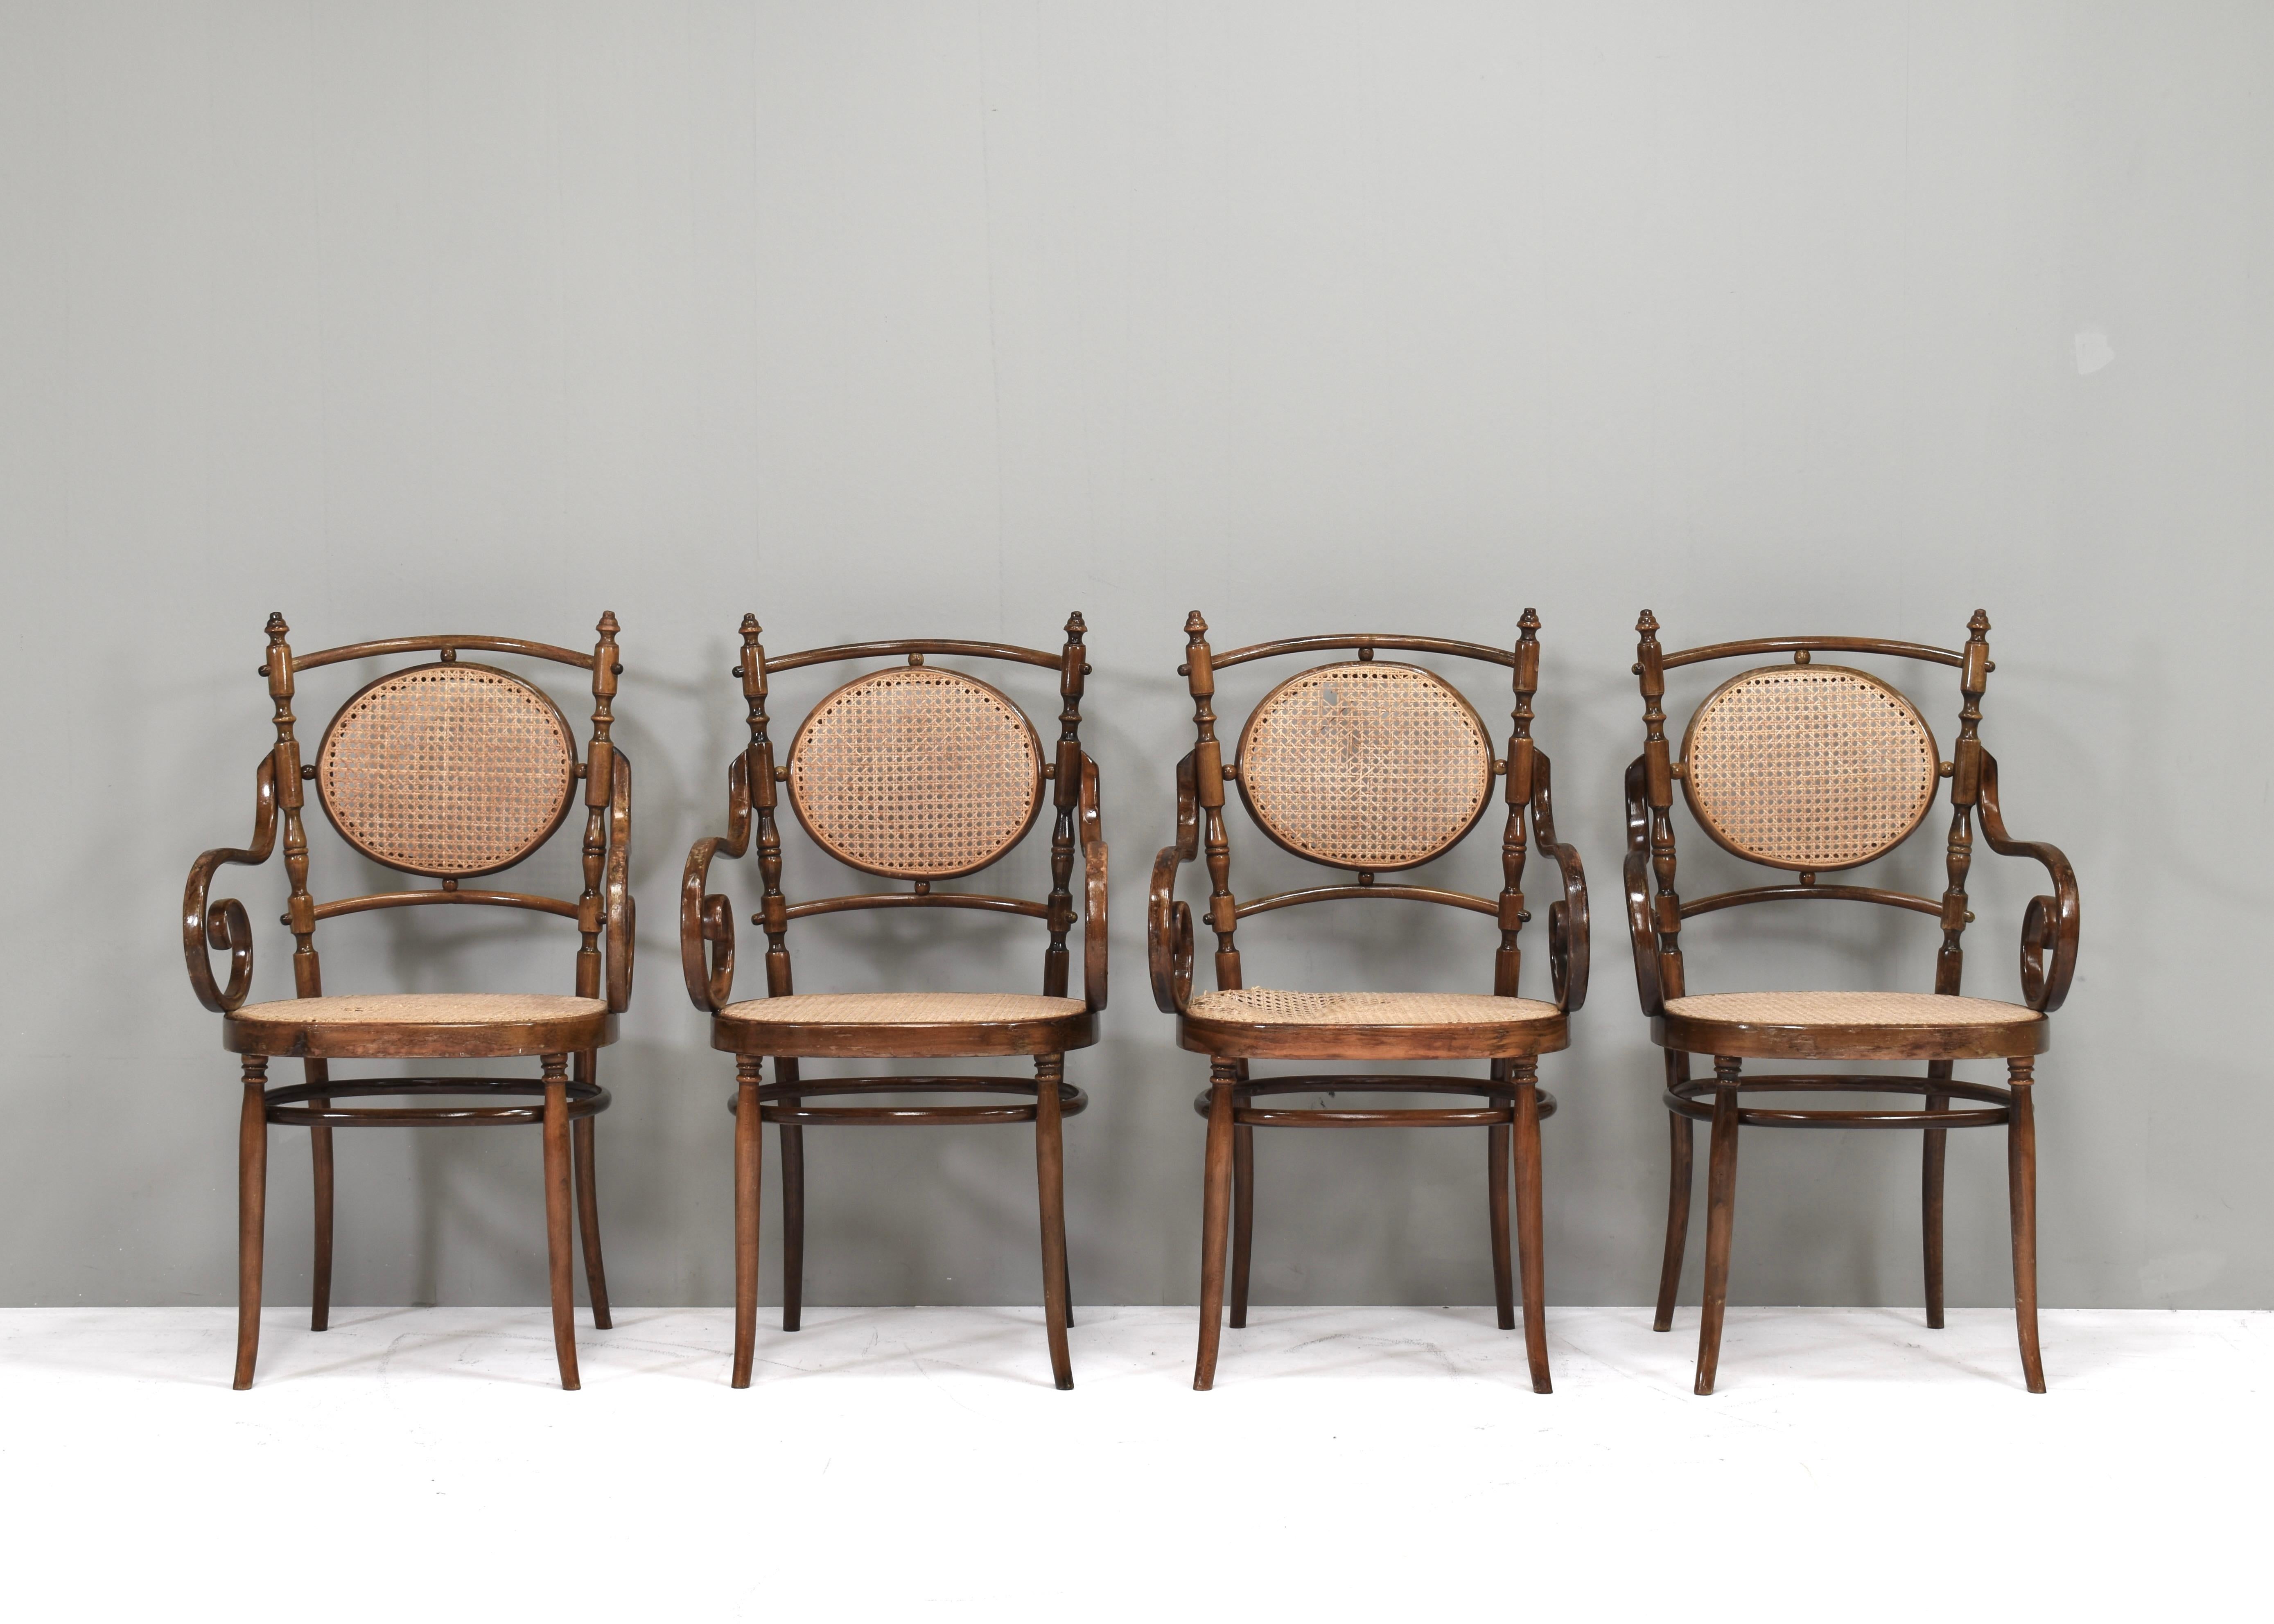 Rococo Revival Early Michael Thonet N.17 Bistro Dining Armchairs in Bentwood and Cane - Austria For Sale